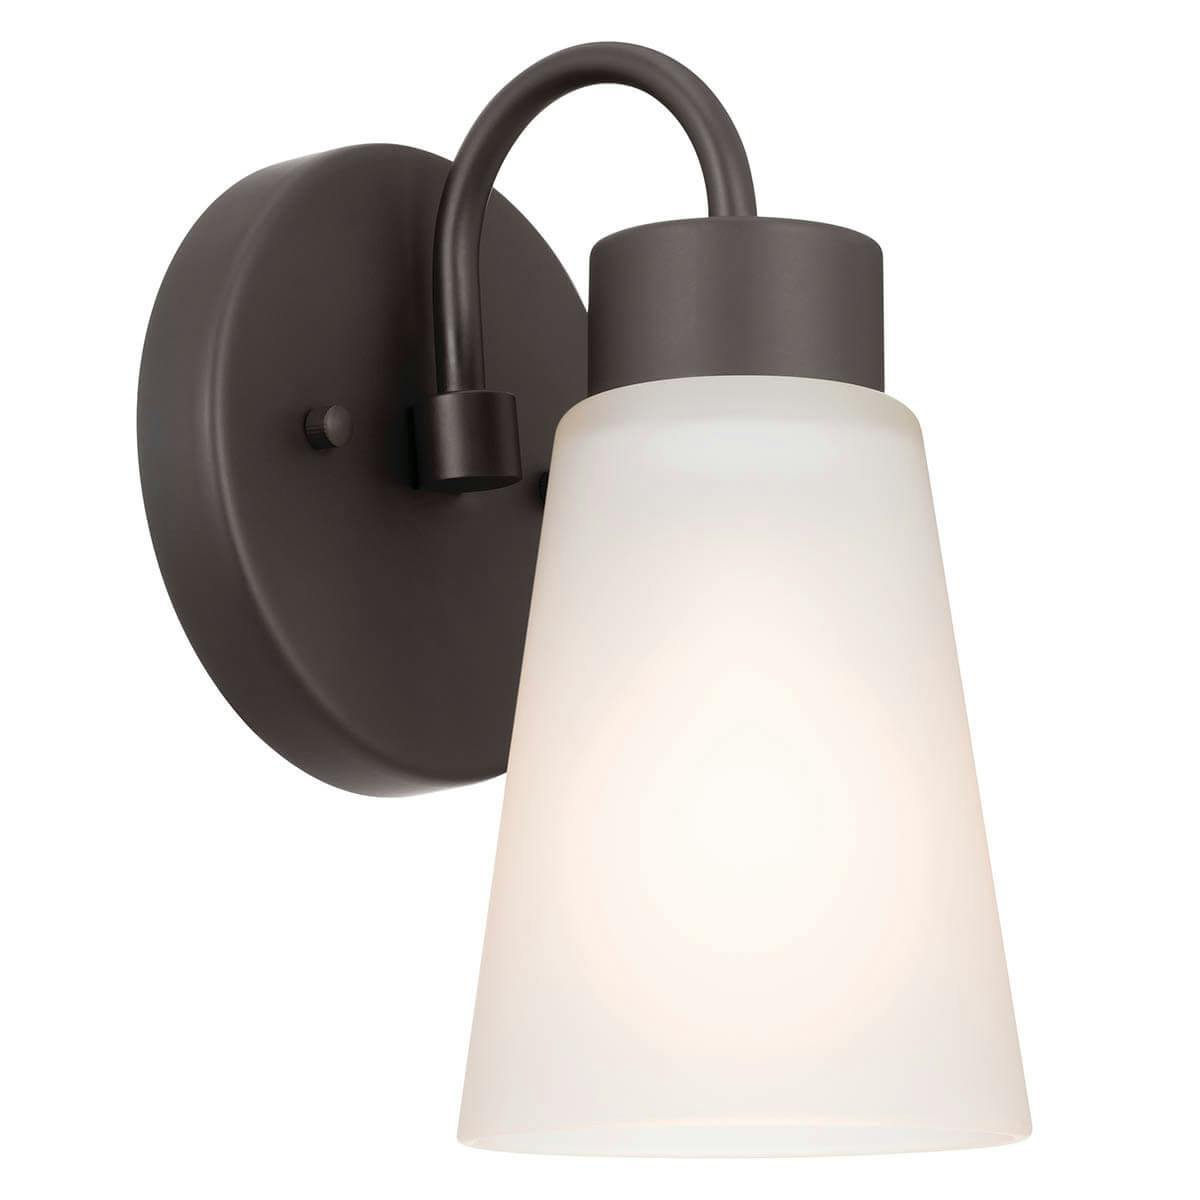 Erma 4.25" Wall Sconce Olde Bronze on a white background